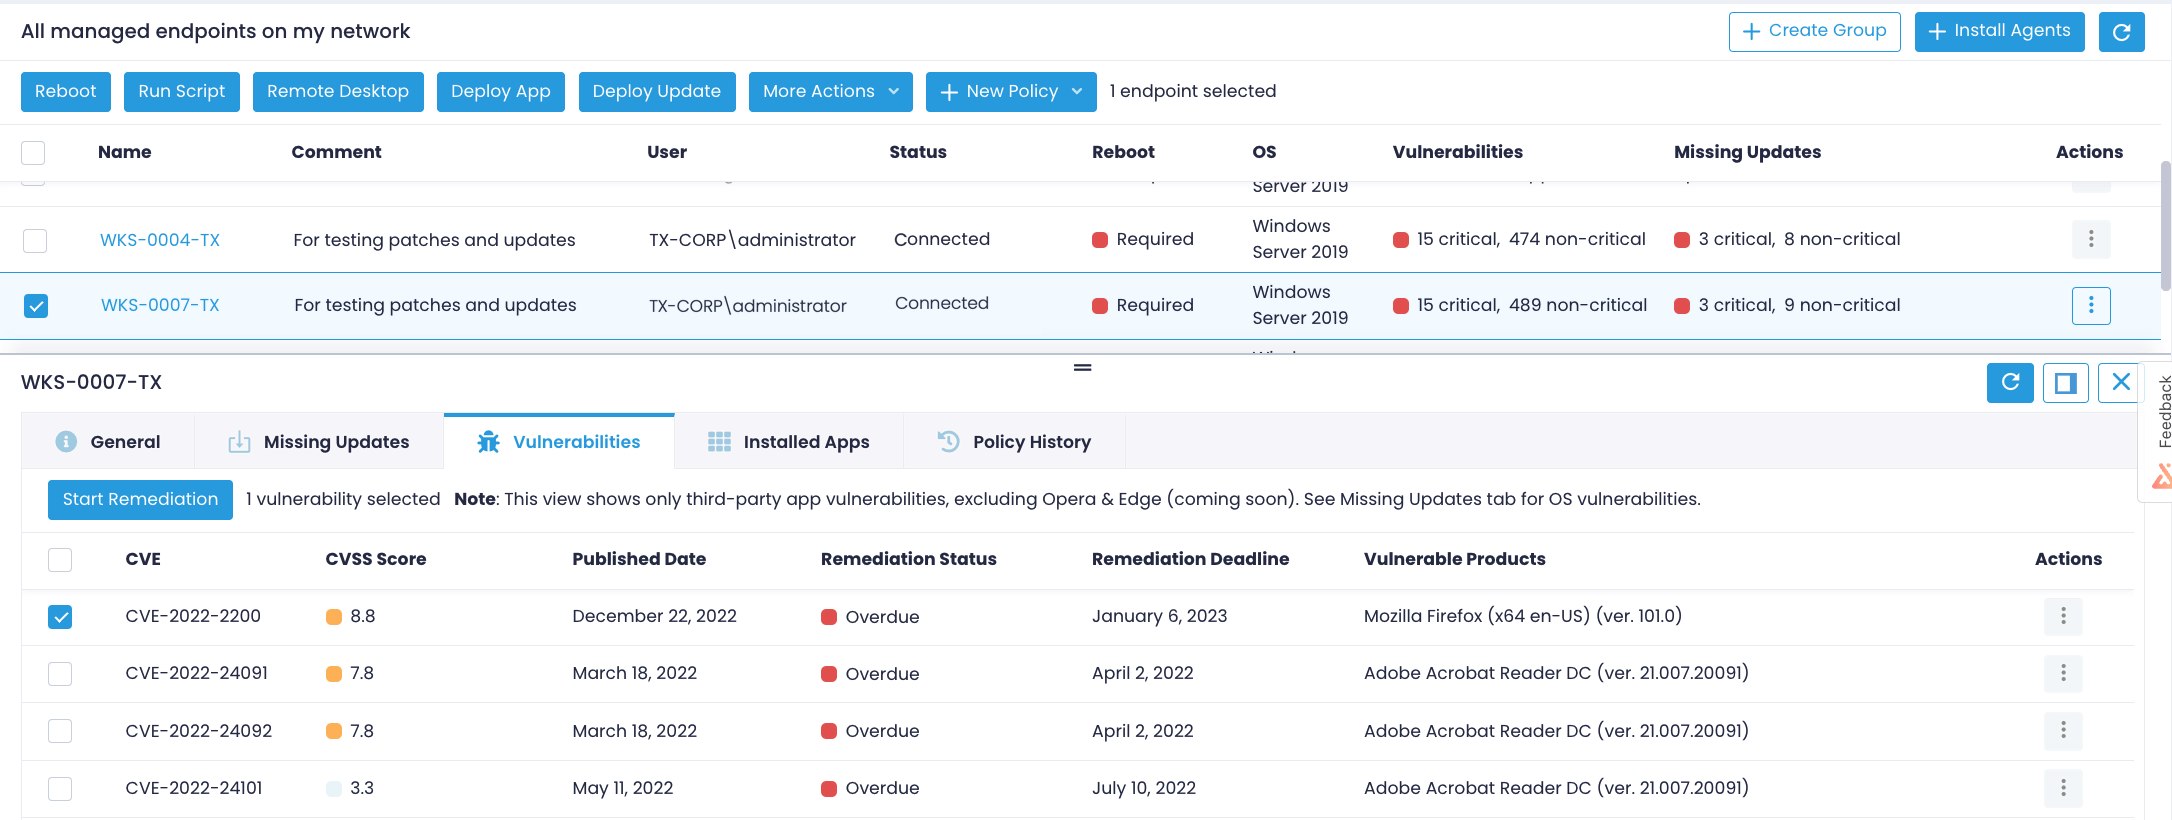 Managed endpoints dashboard with expanded Vulnerabilities tab